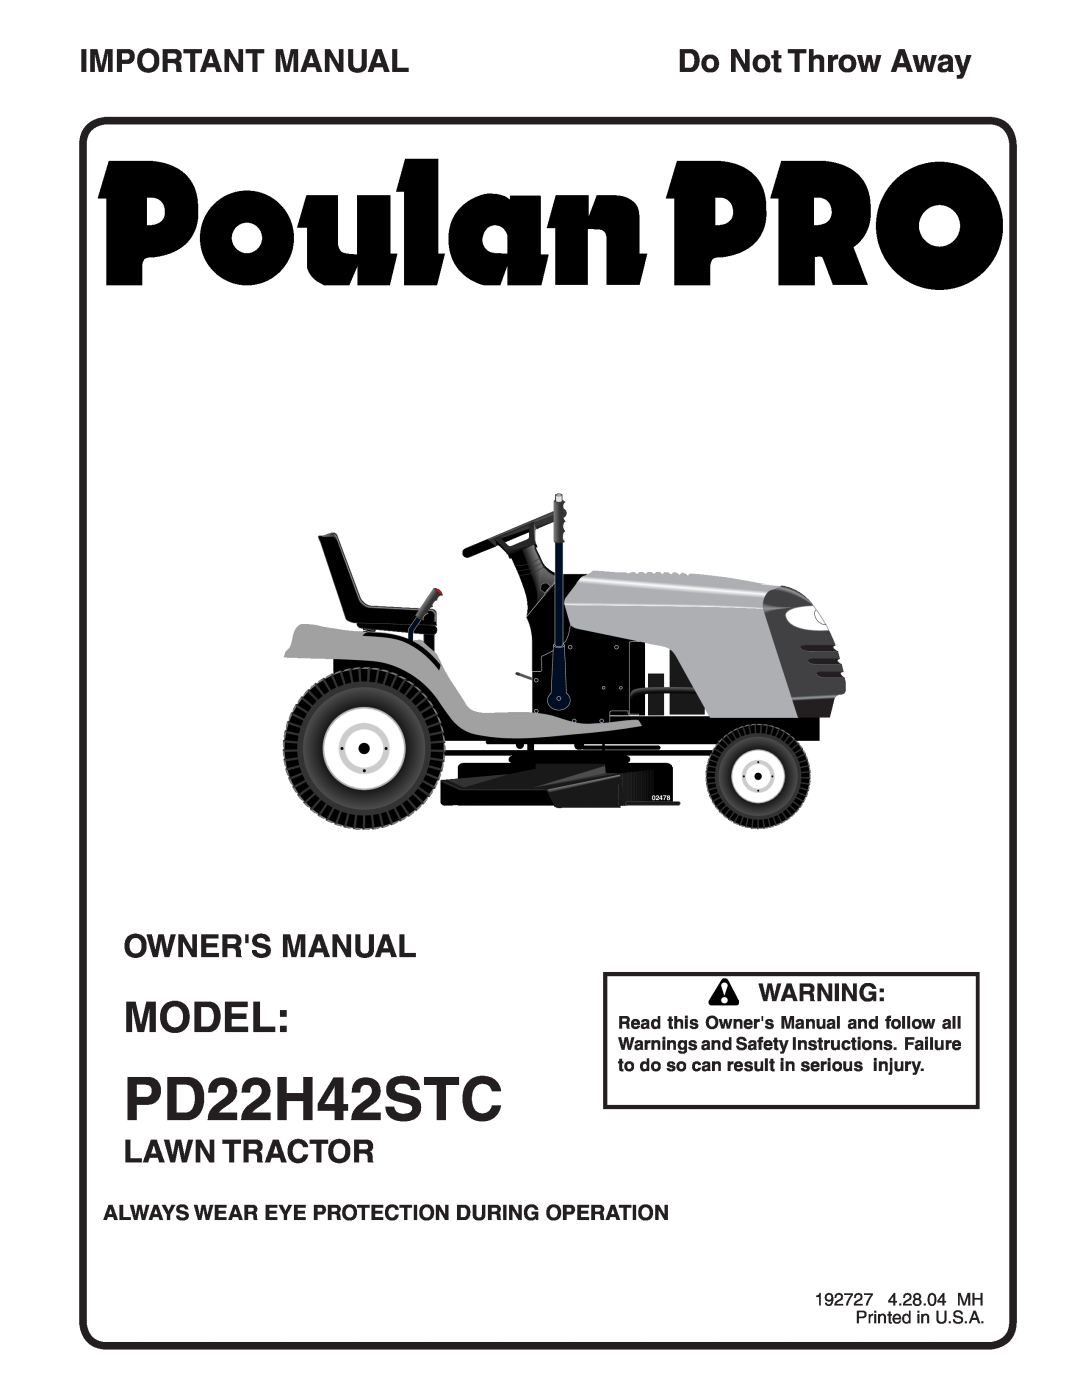 Poulan PD22H42STC owner manual Model, Important Manual, Owners Manual, Lawn Tractor, Do Not Throw Away, 02478 